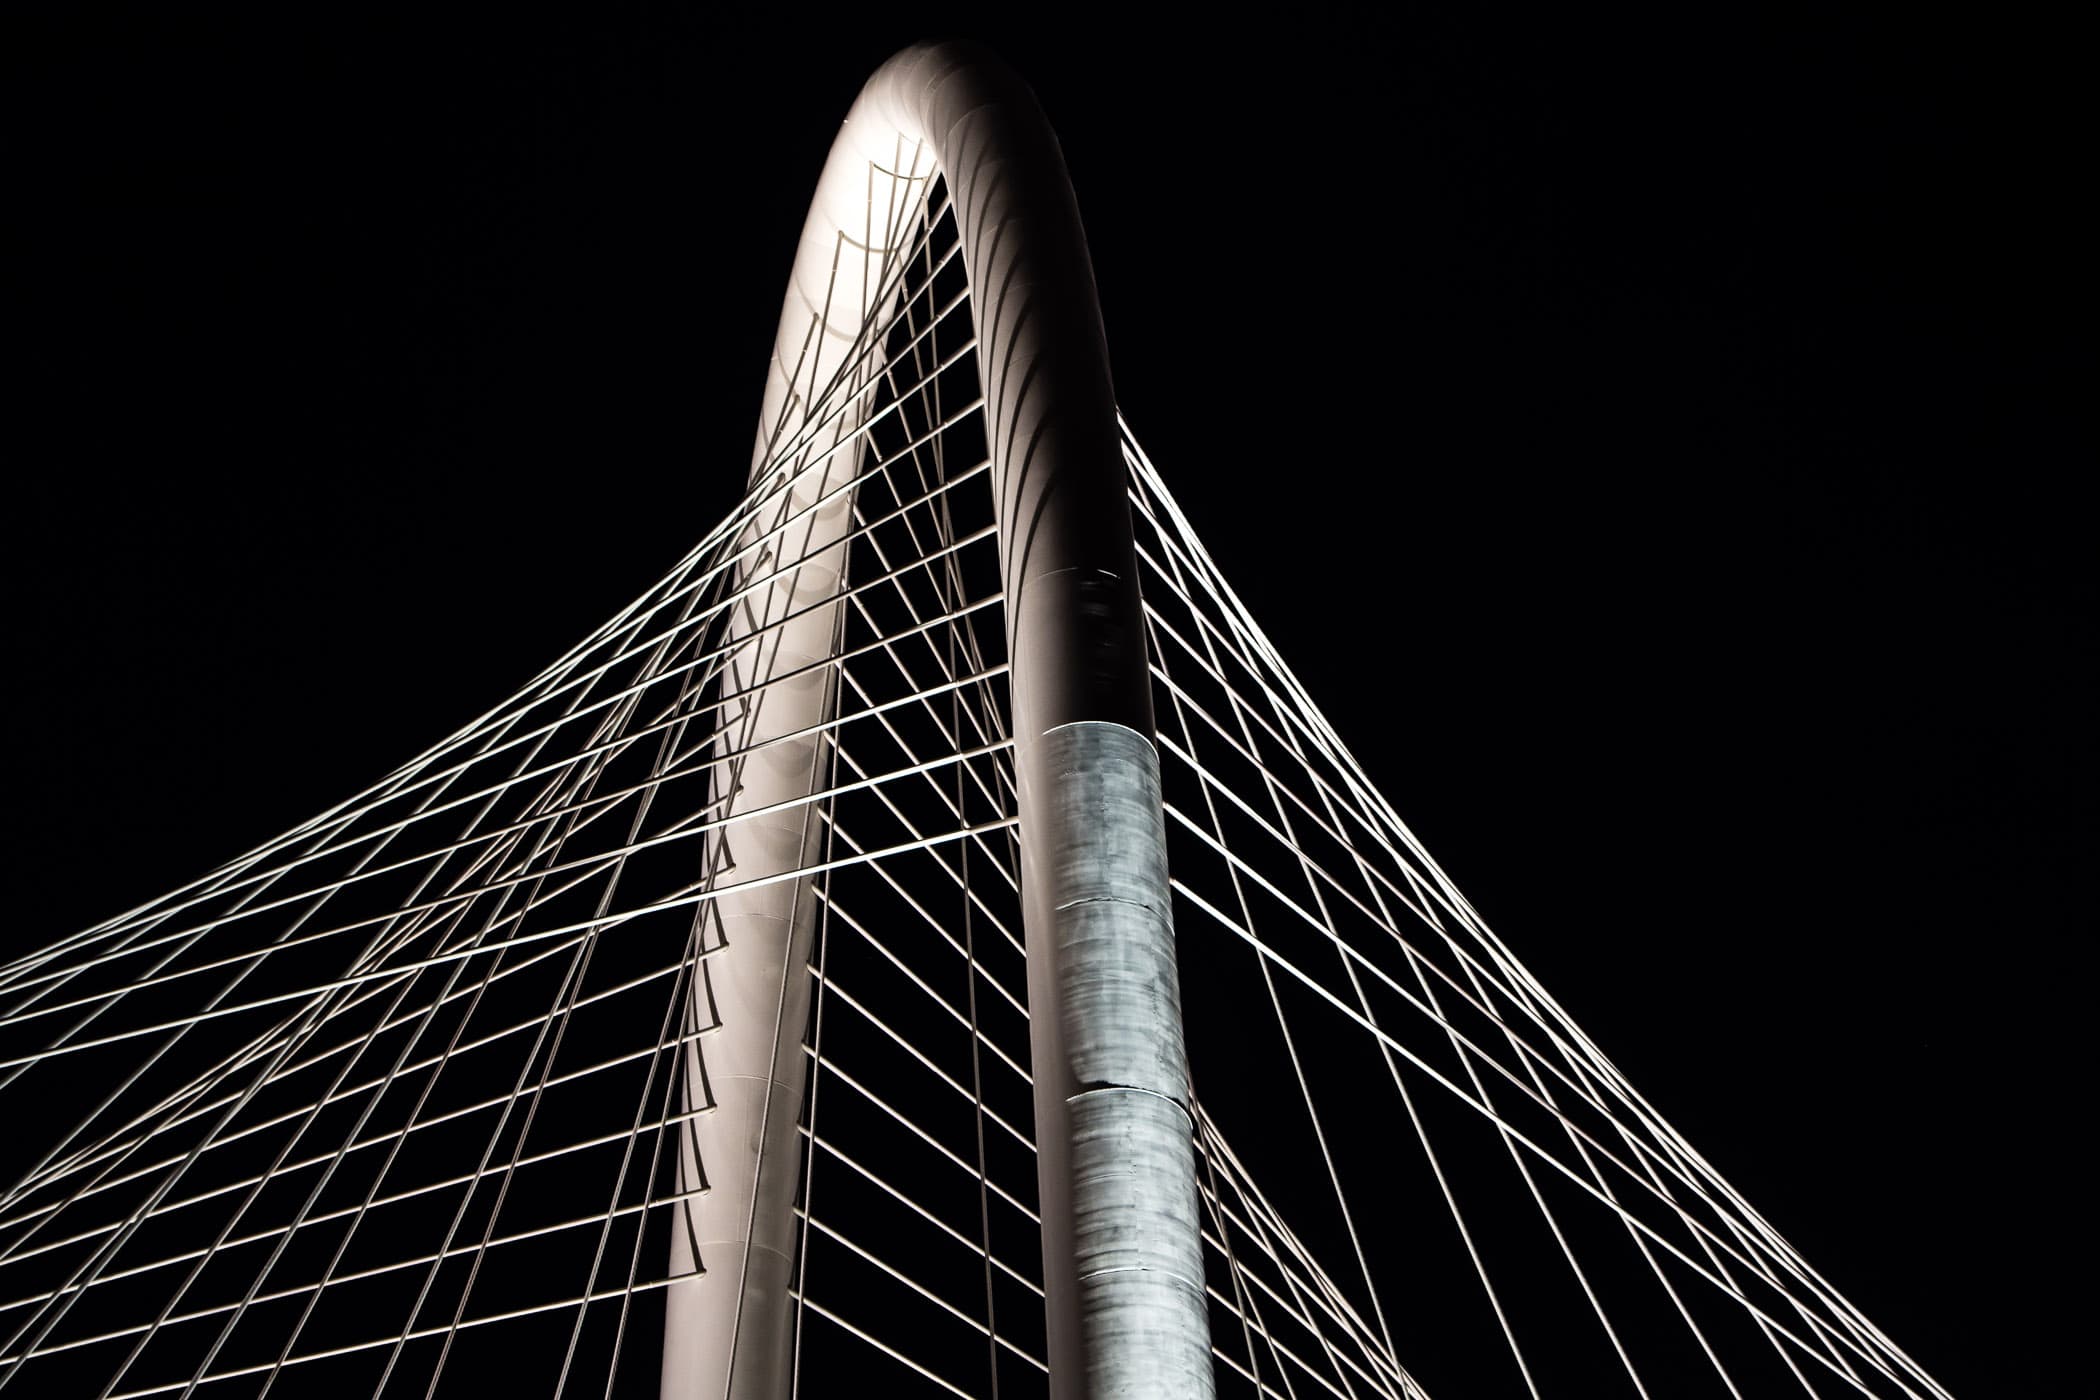 Nighttime detail of the arch and cables of the Santiago Calatrava-designed Margaret Hunt Hill Bridge, Dallas.